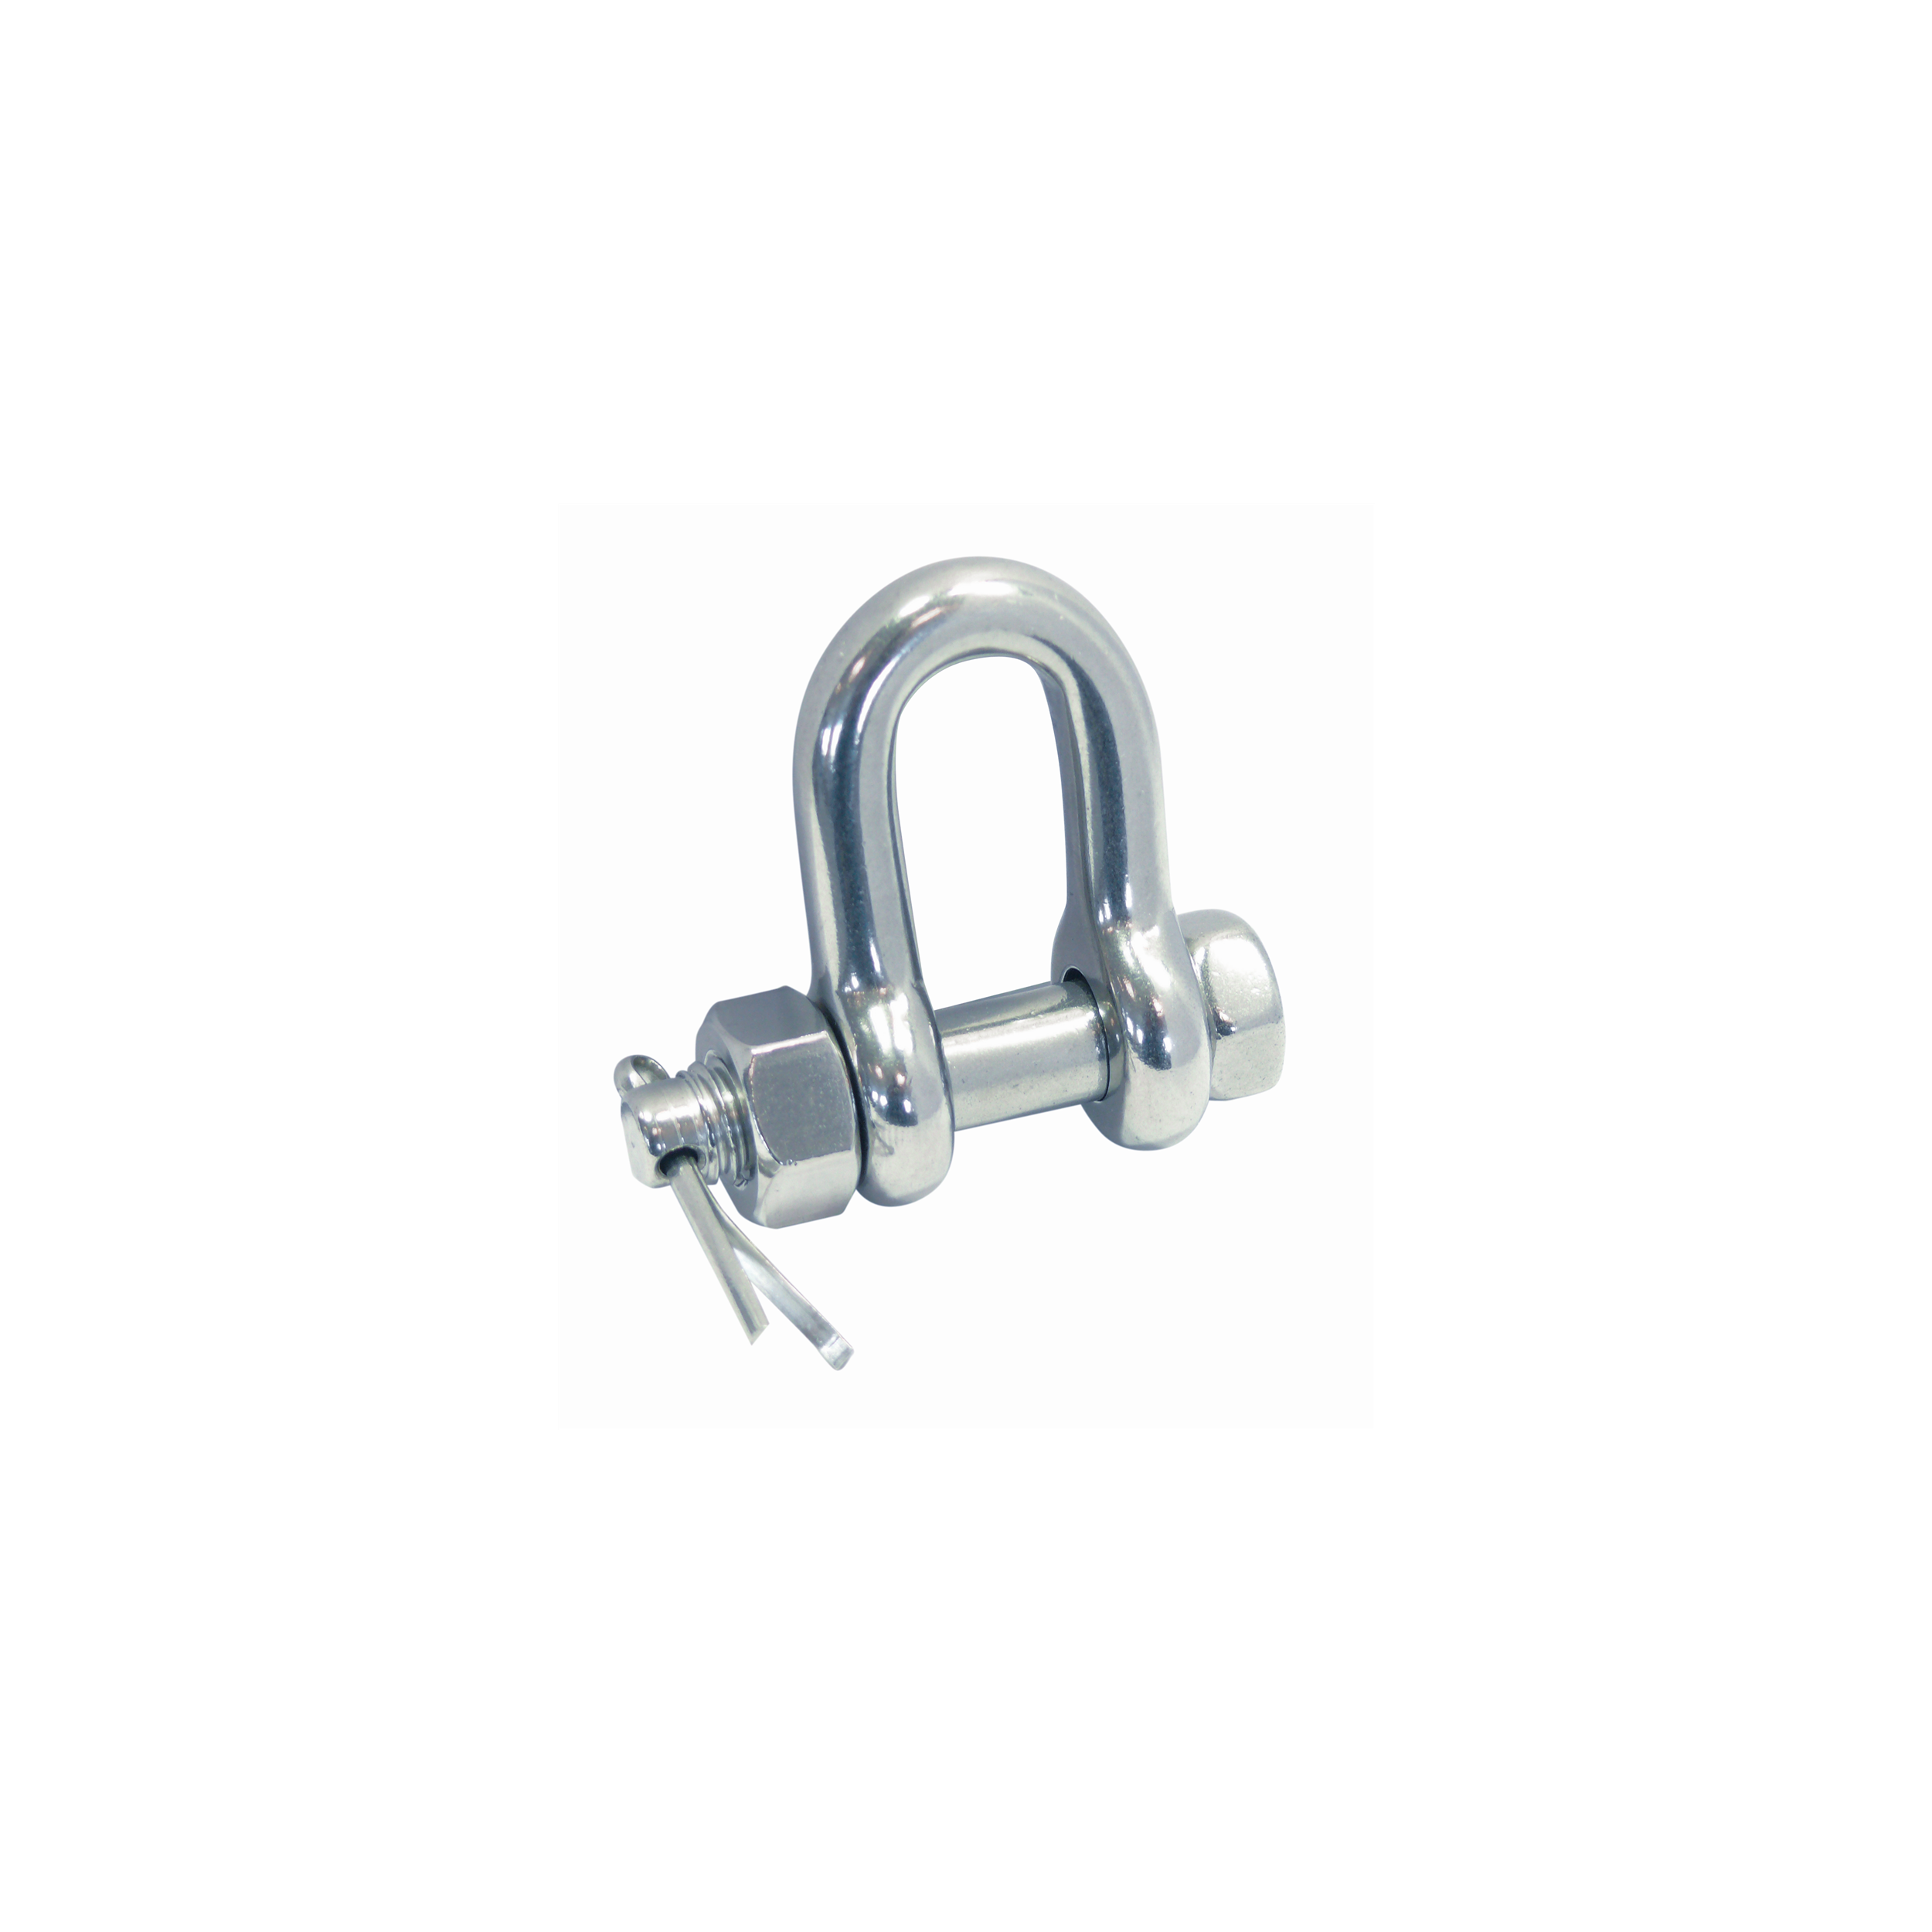 D-shackle with secure bolt A4  bolt 6.4mm, bow 5mm